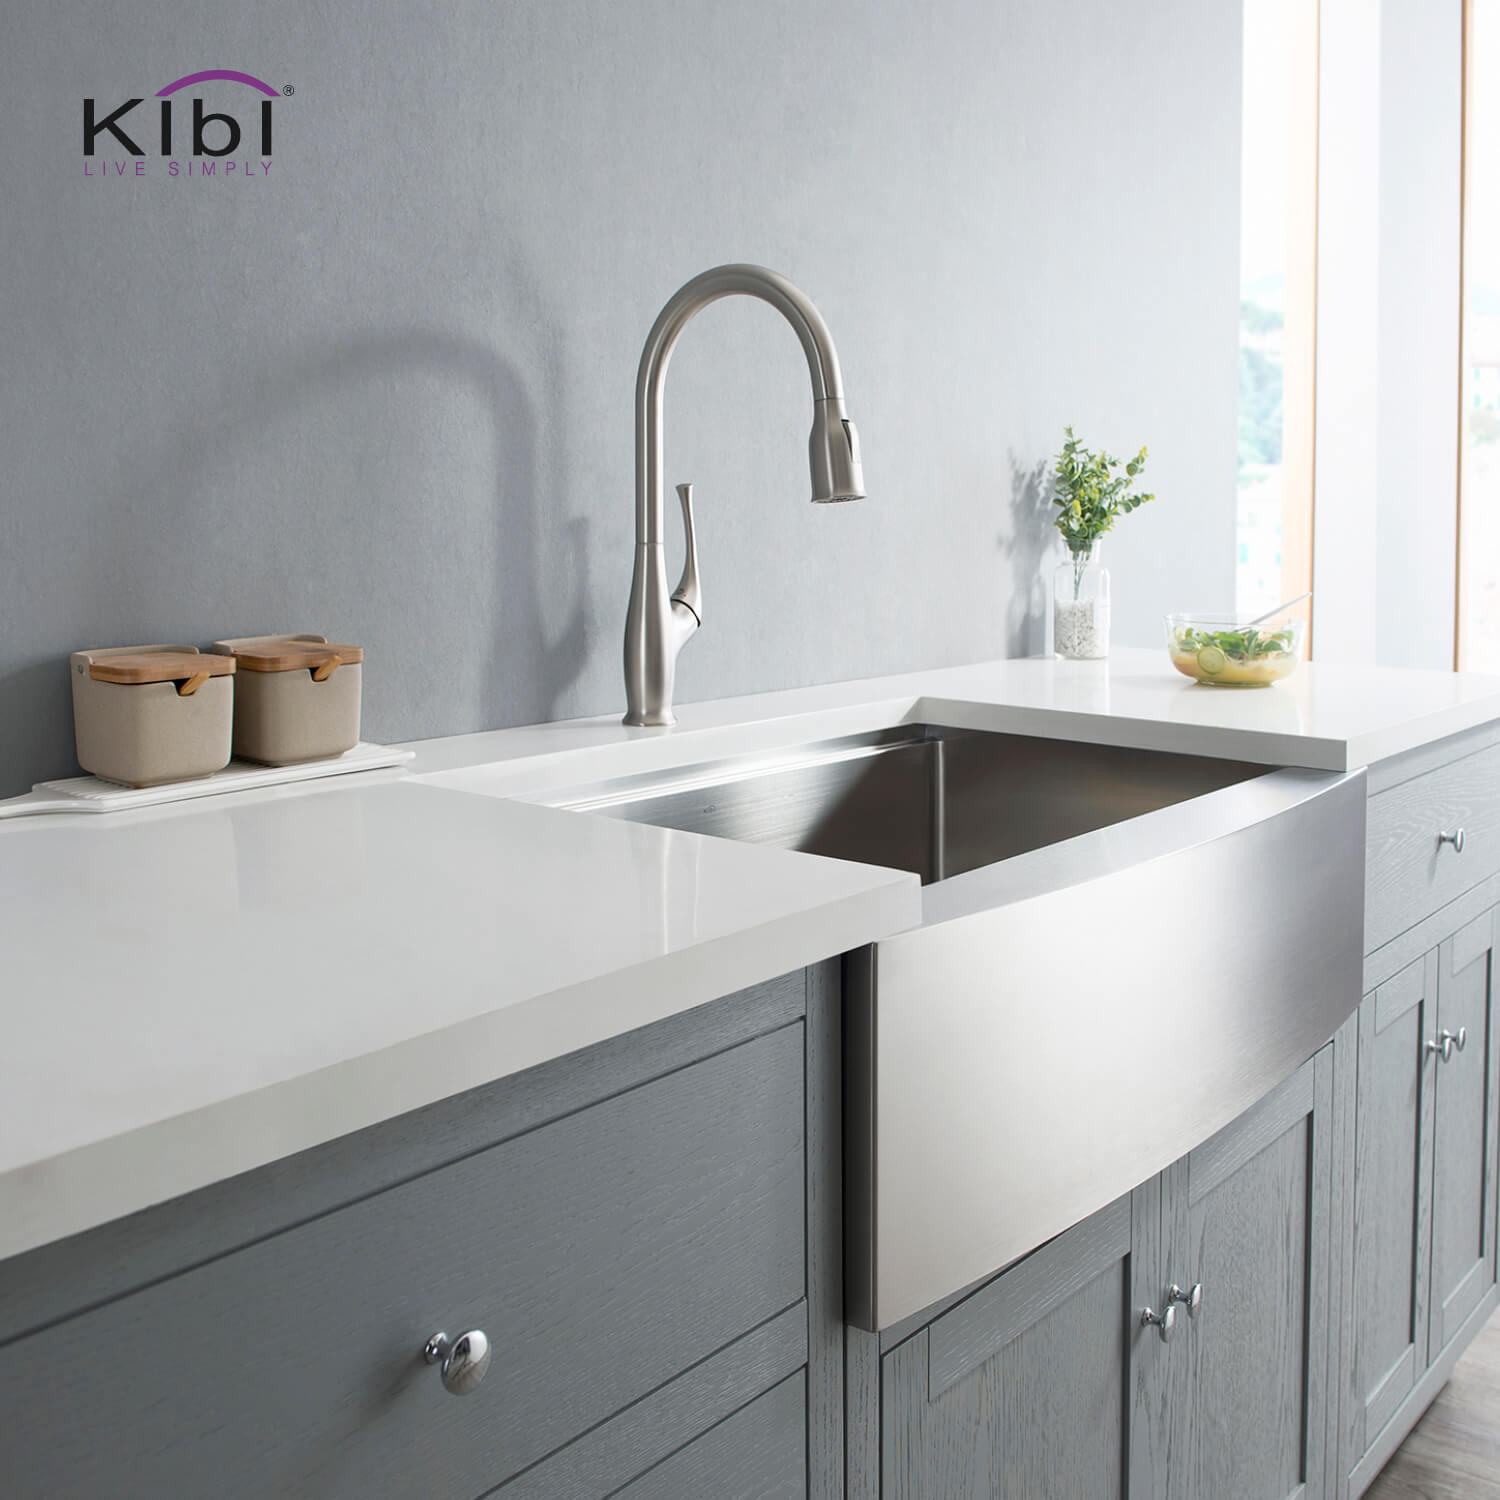 Kibi Cedar Single Handle High Arc Pull Down Kitchen Faucet With Soap Dispenser in Brushed Nickel Finish